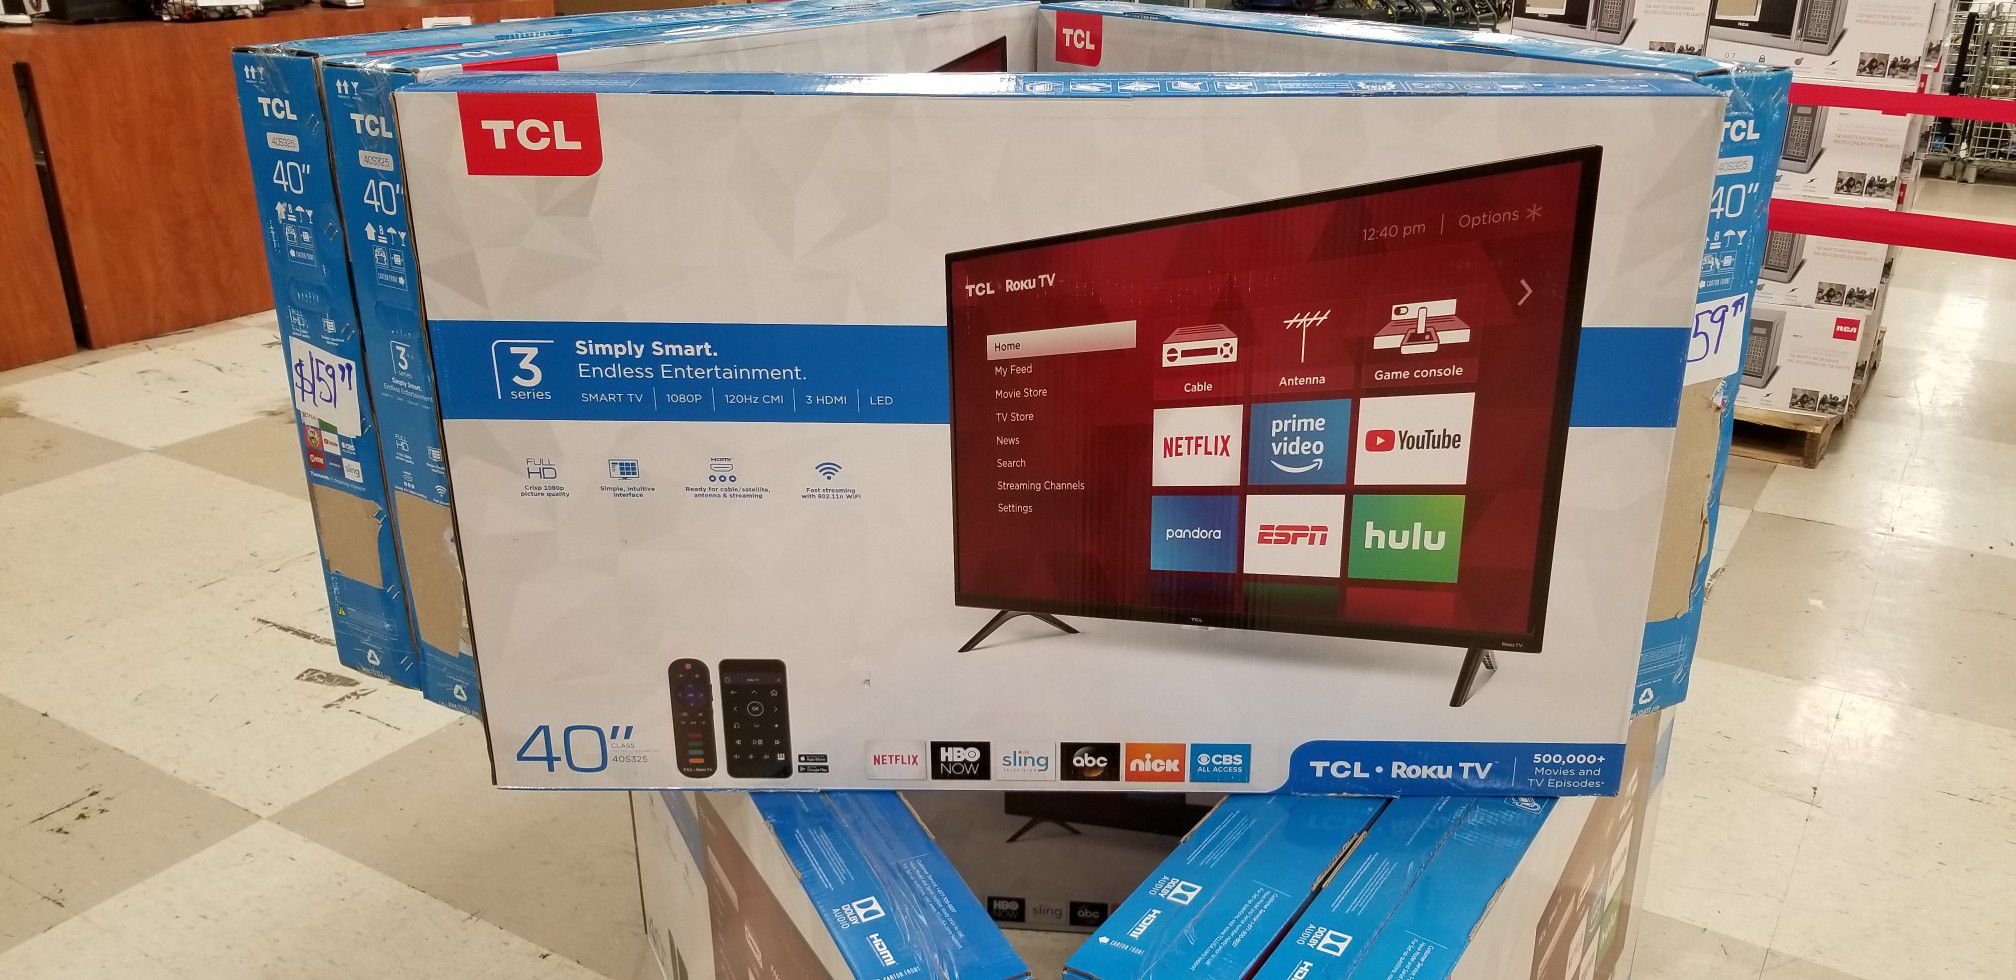 TCL 40" roku smart TV new in box